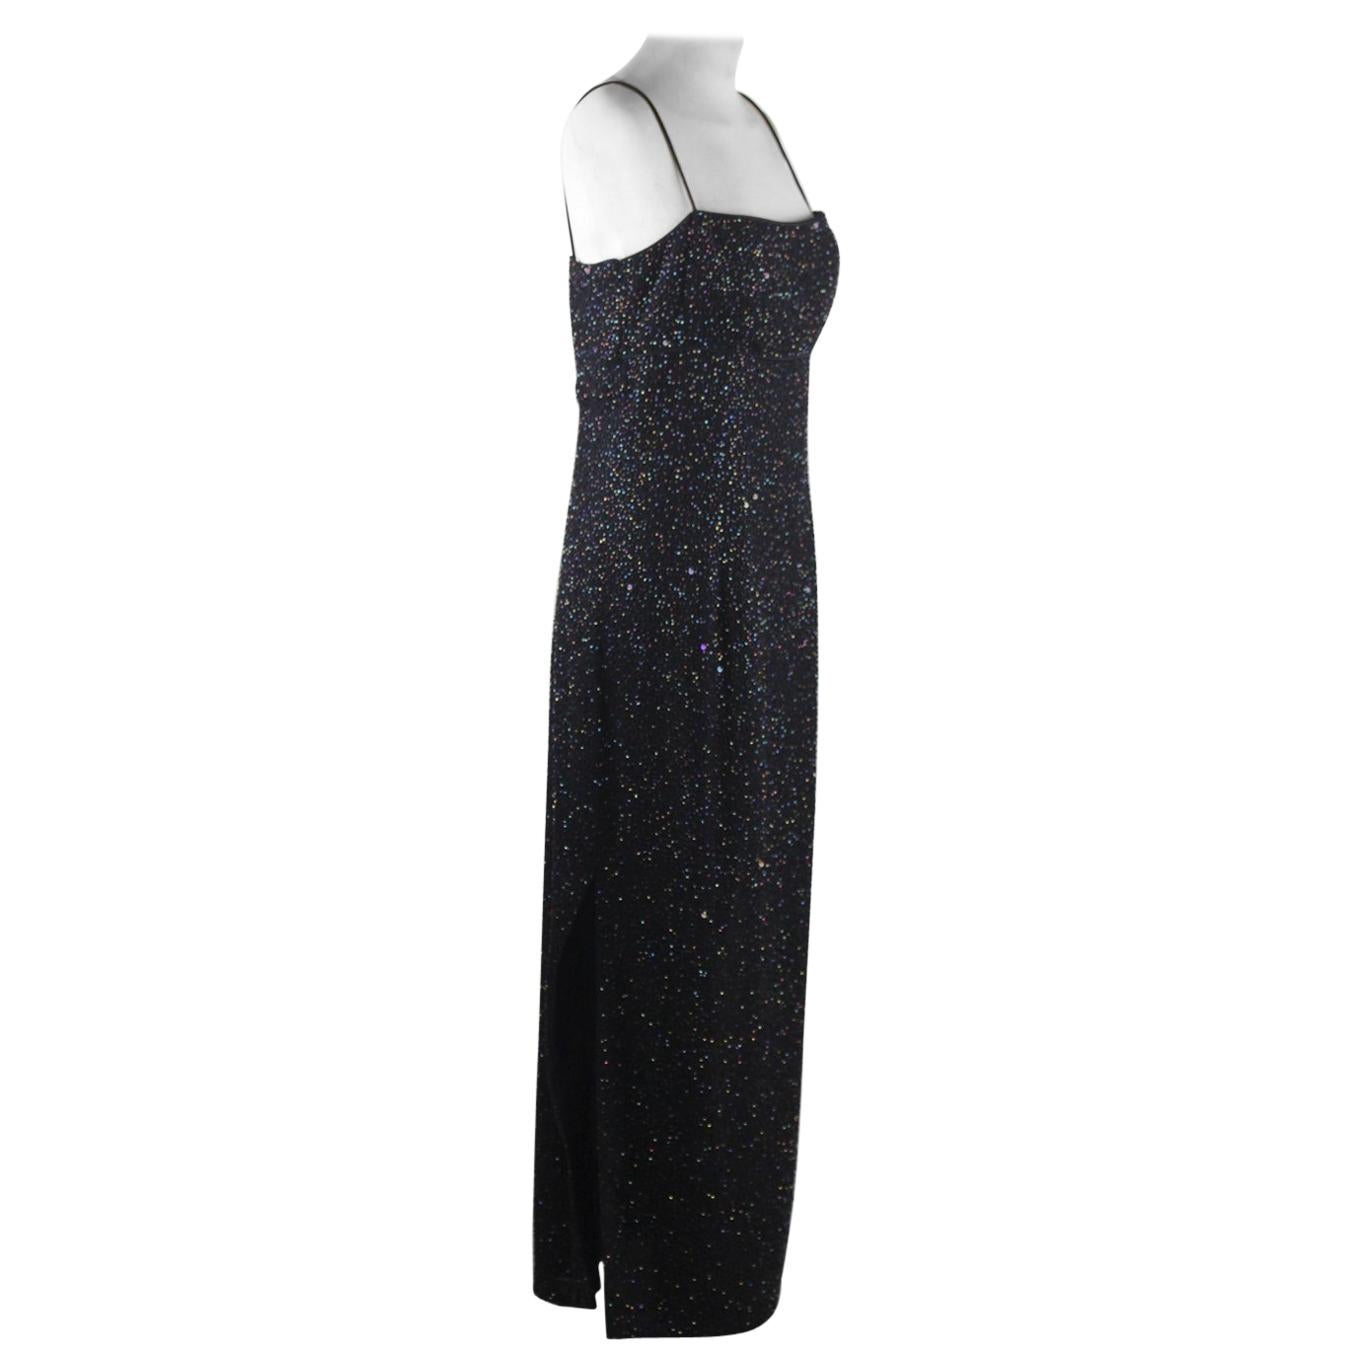 Morgan & Co. By Linda Bernell Embellished Evening Maxi Dress